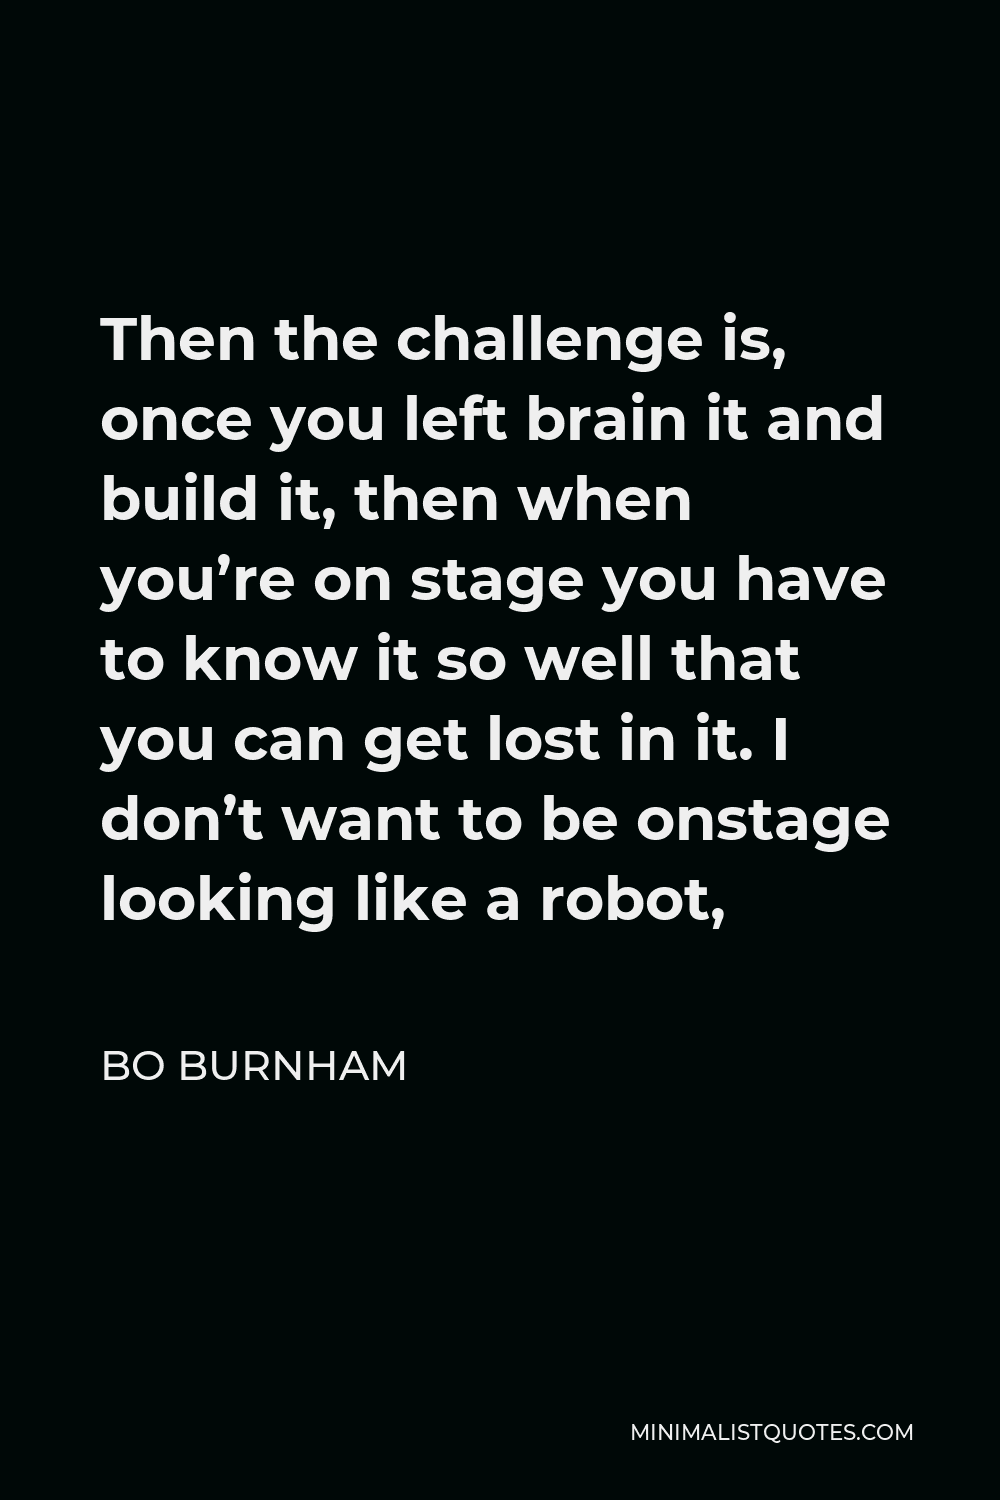 Bo Burnham Quote - Then the challenge is, once you left brain it and build it, then when you’re on stage you have to know it so well that you can get lost in it. I don’t want to be onstage looking like a robot,